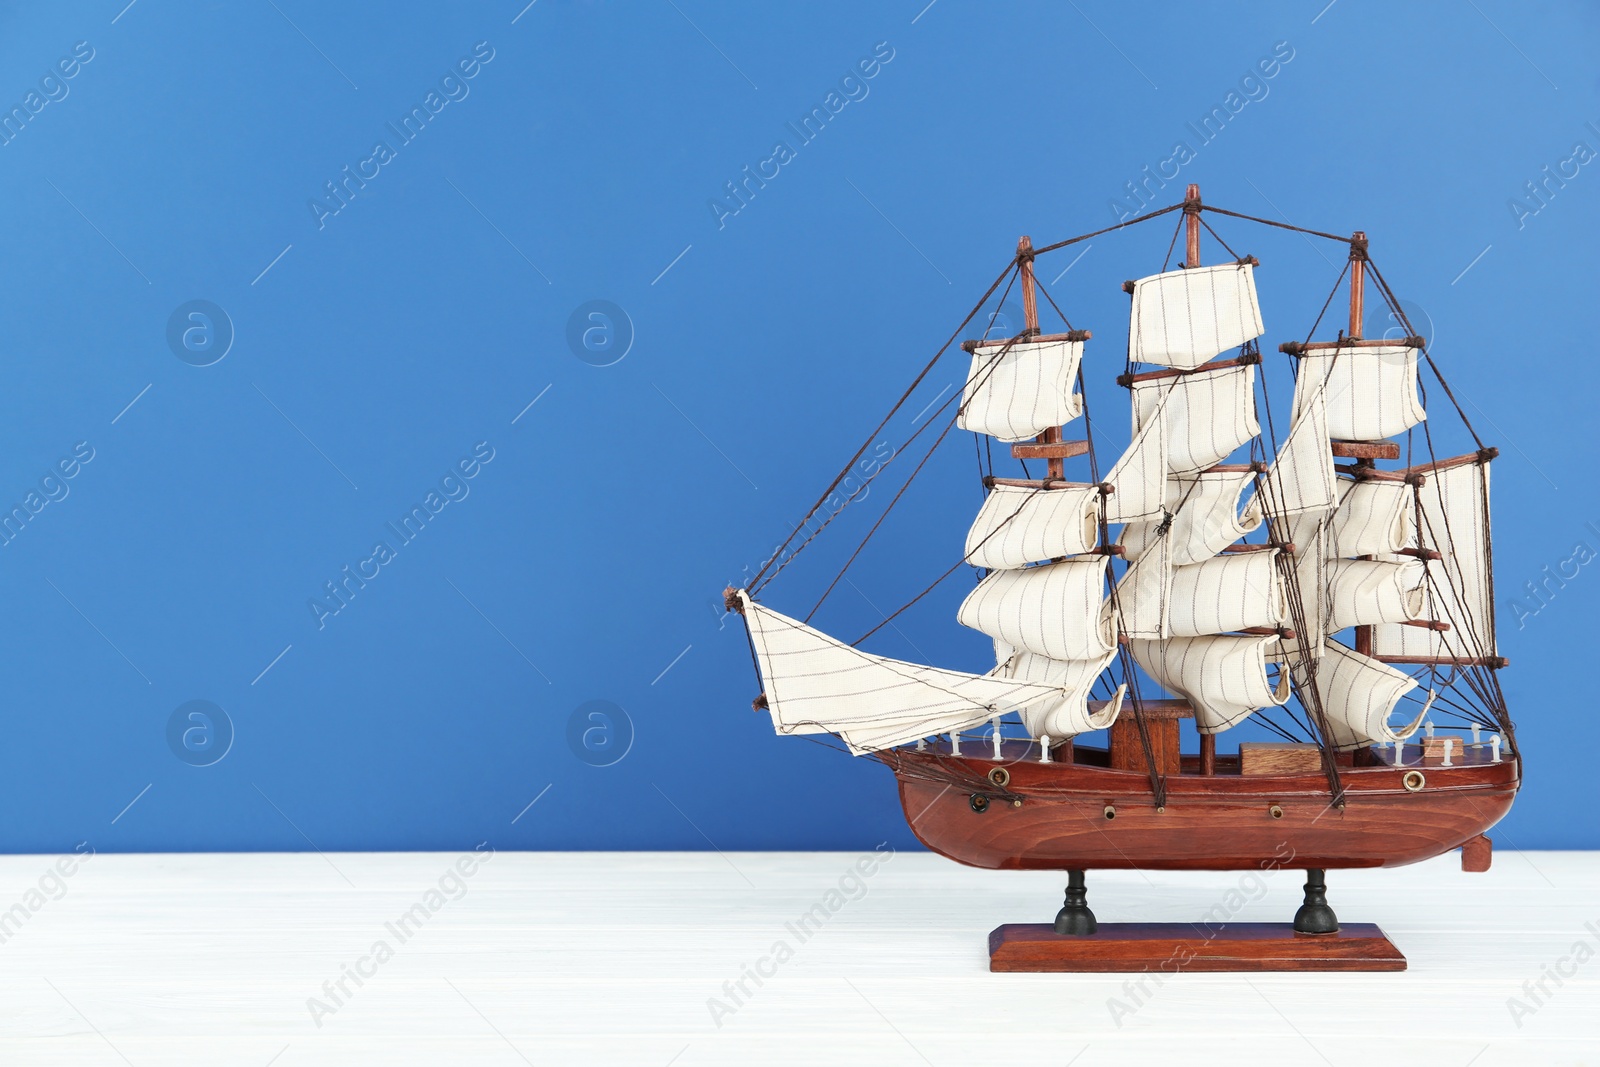 Photo of Miniature model of old ship with white sails on table against blue background, space for text